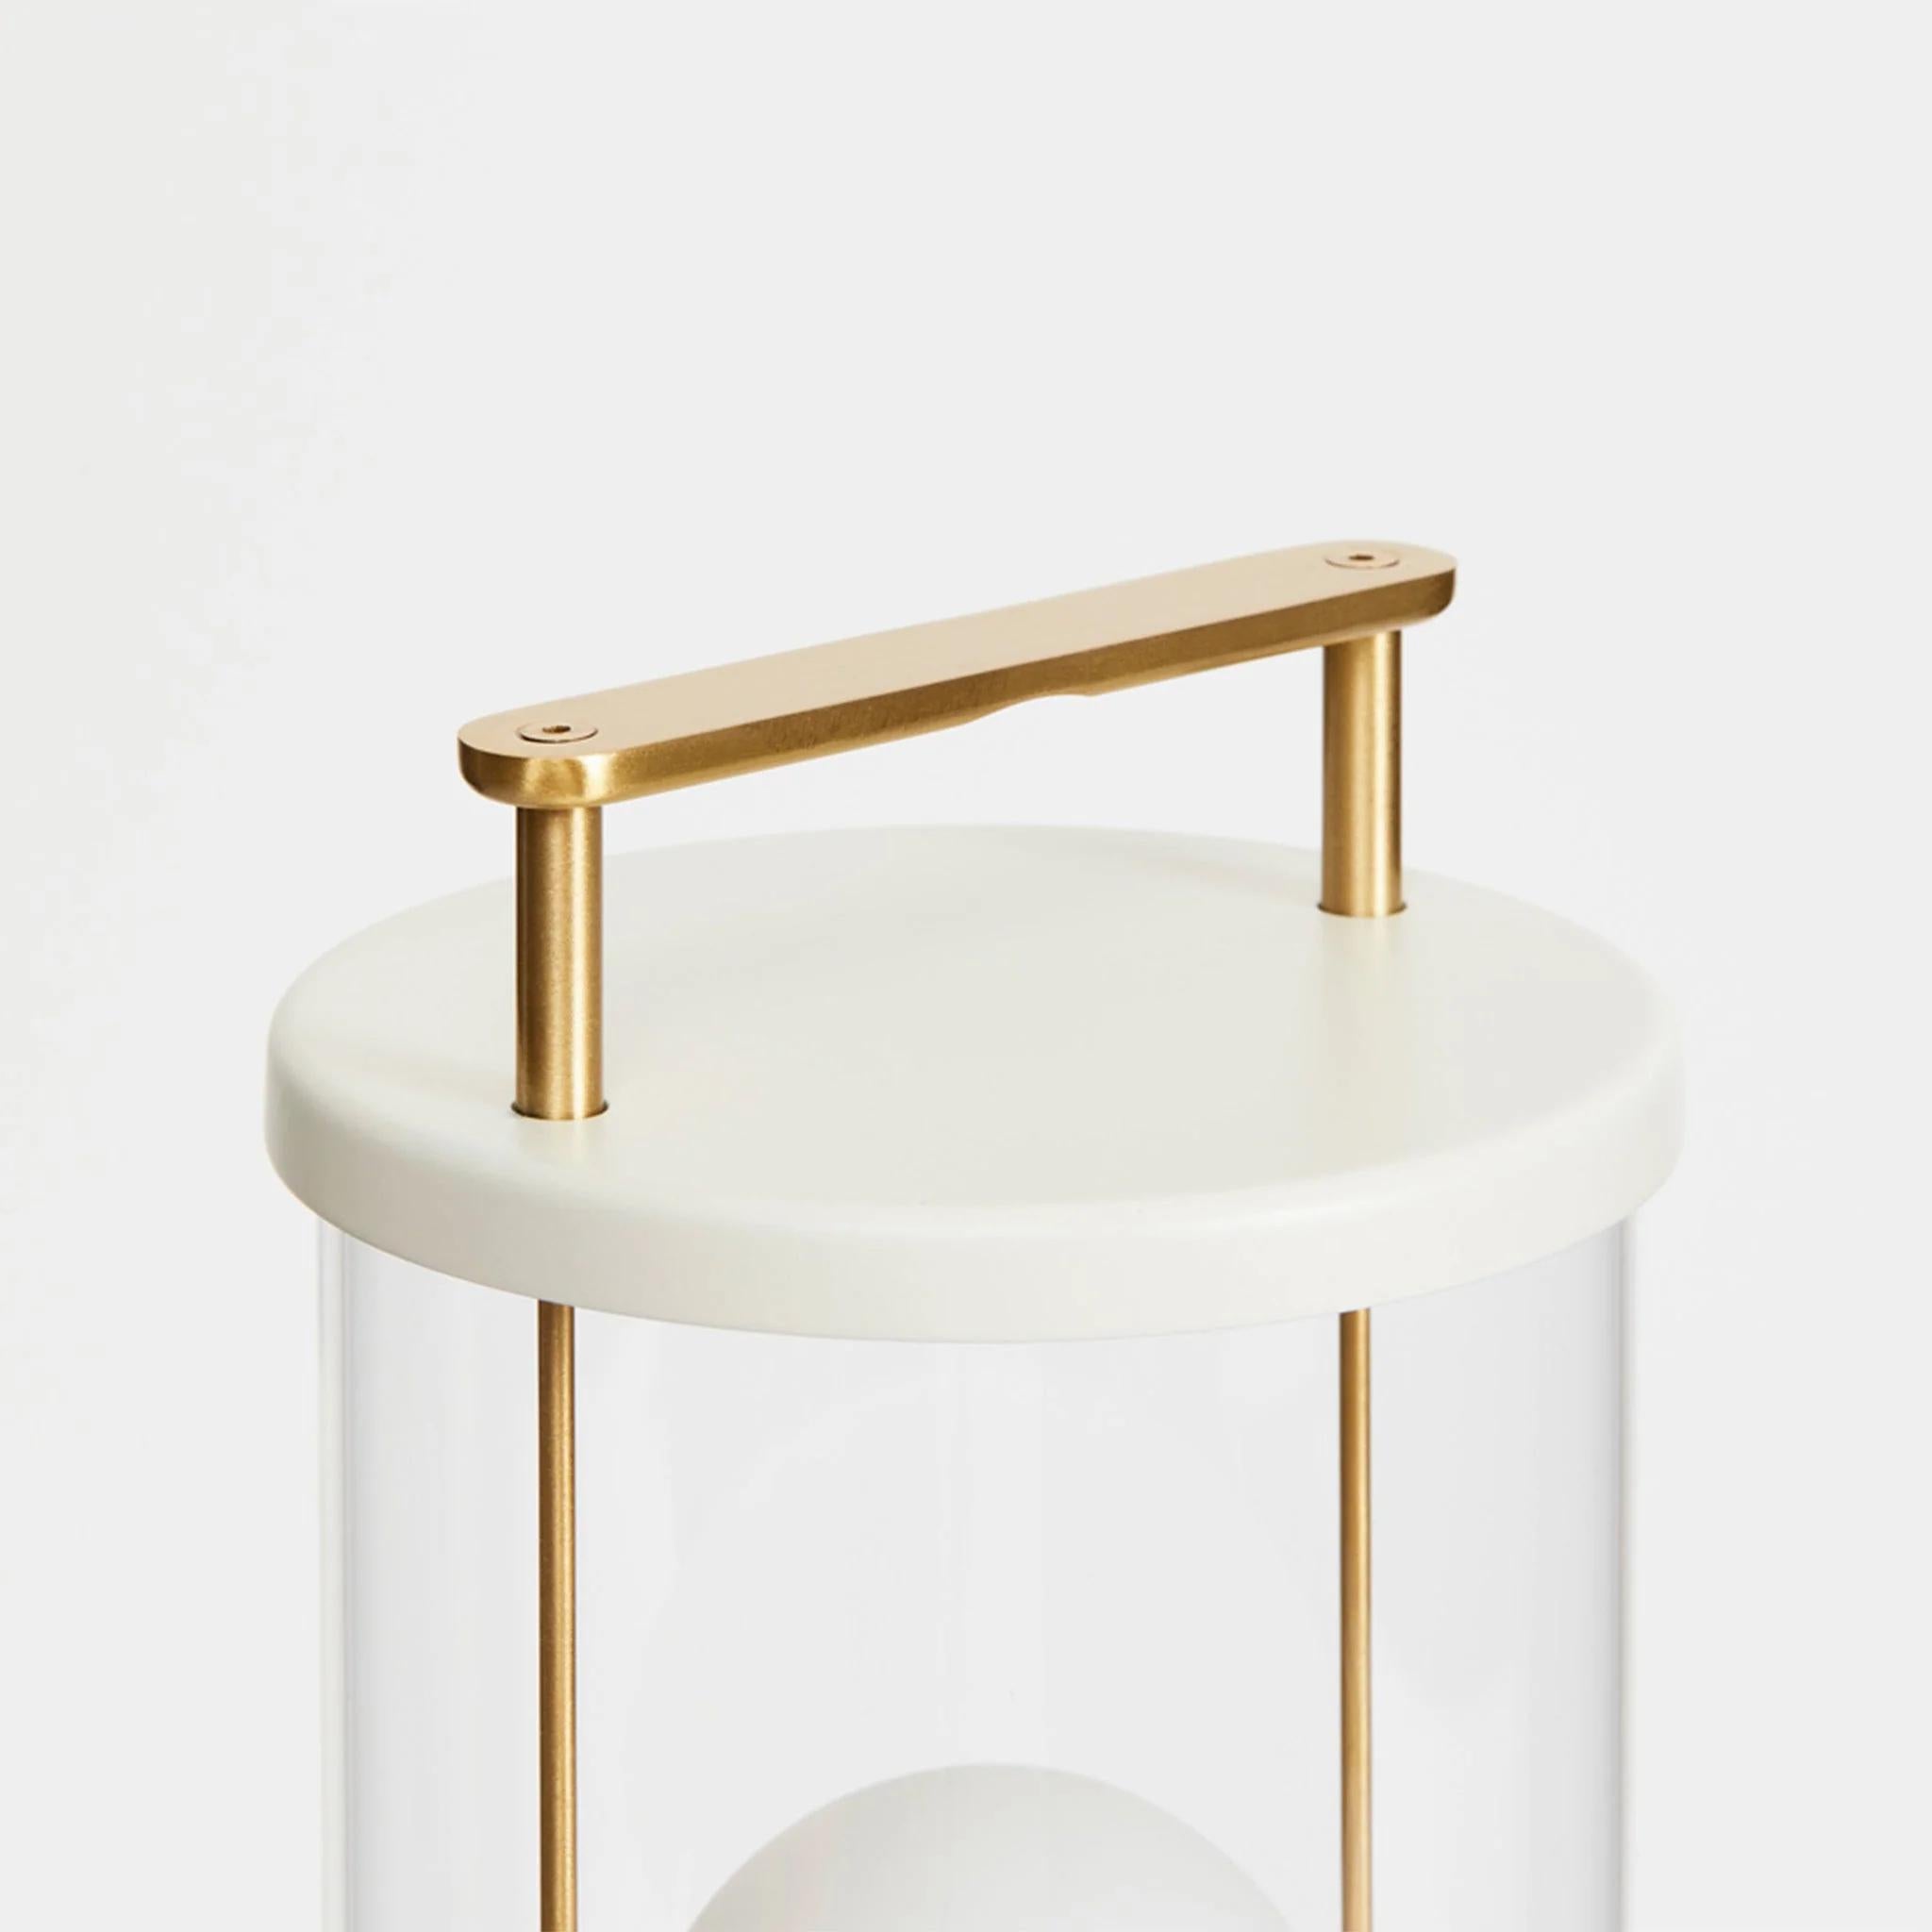 'The Muse' Portable Lamp by Farrow & Ball x Tala in Candlenut White For Sale 1